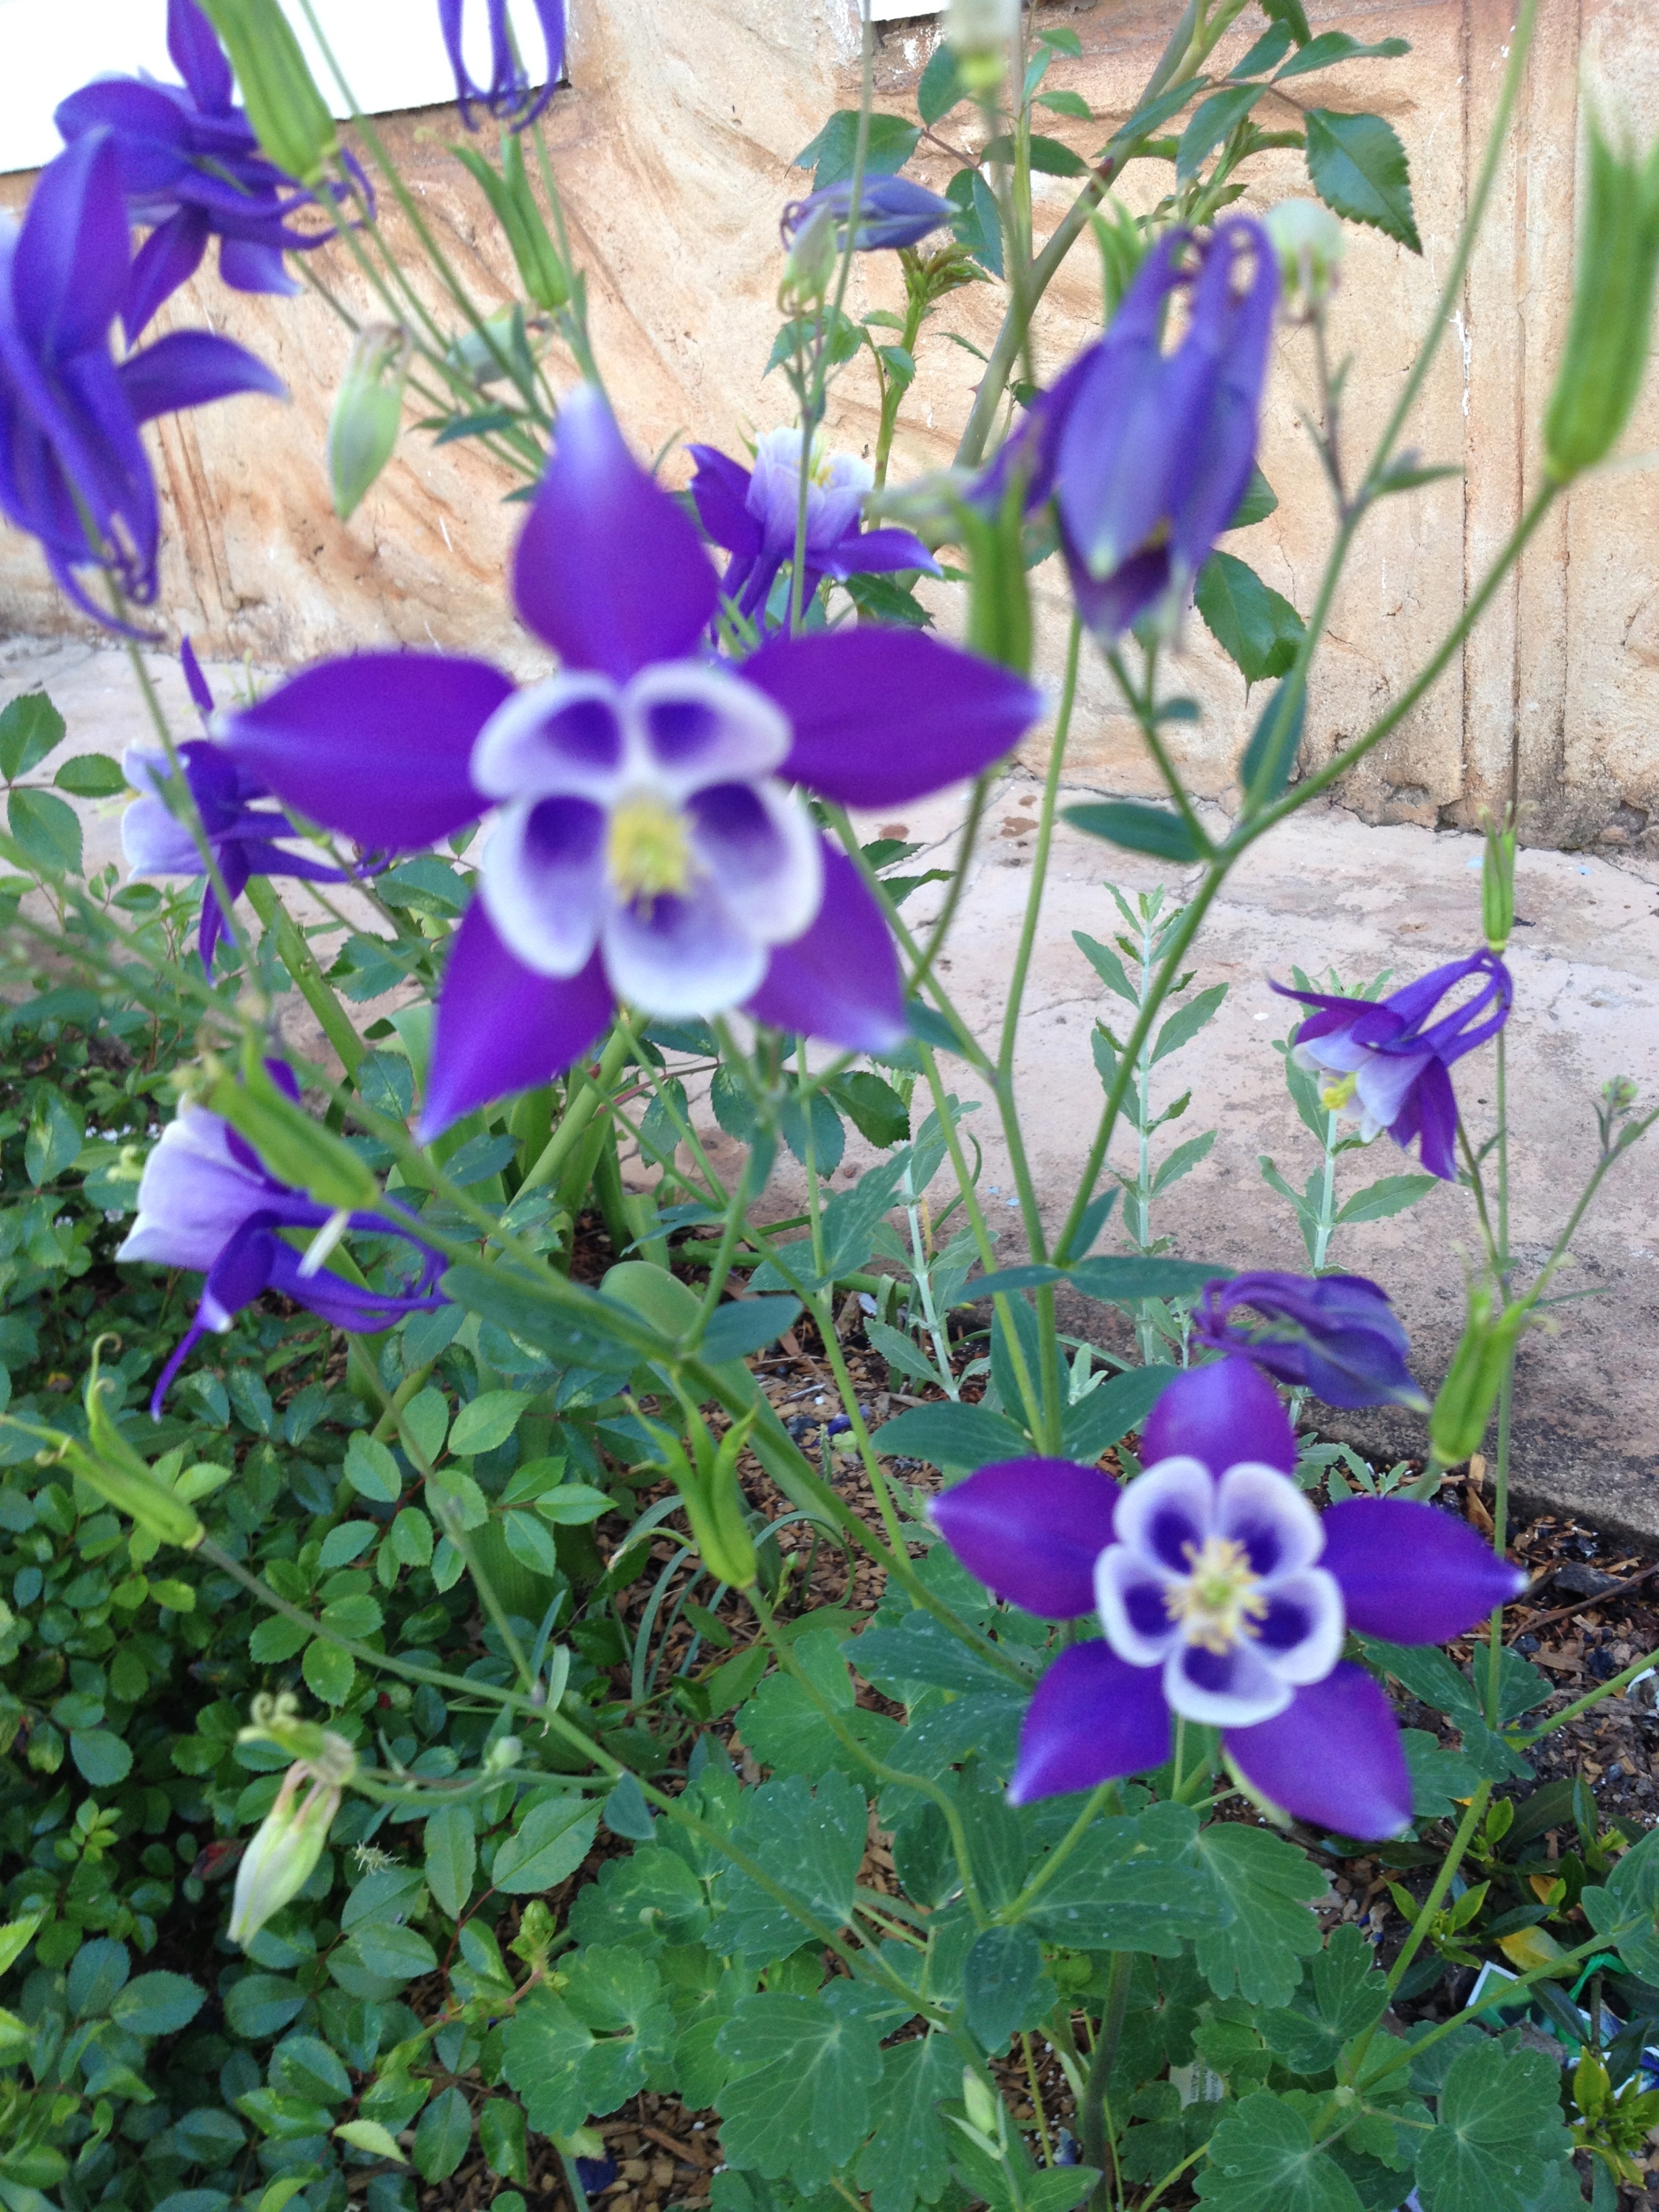 Aquilegia, Granny's Bonnet, Columbine – a flower by any other name ...